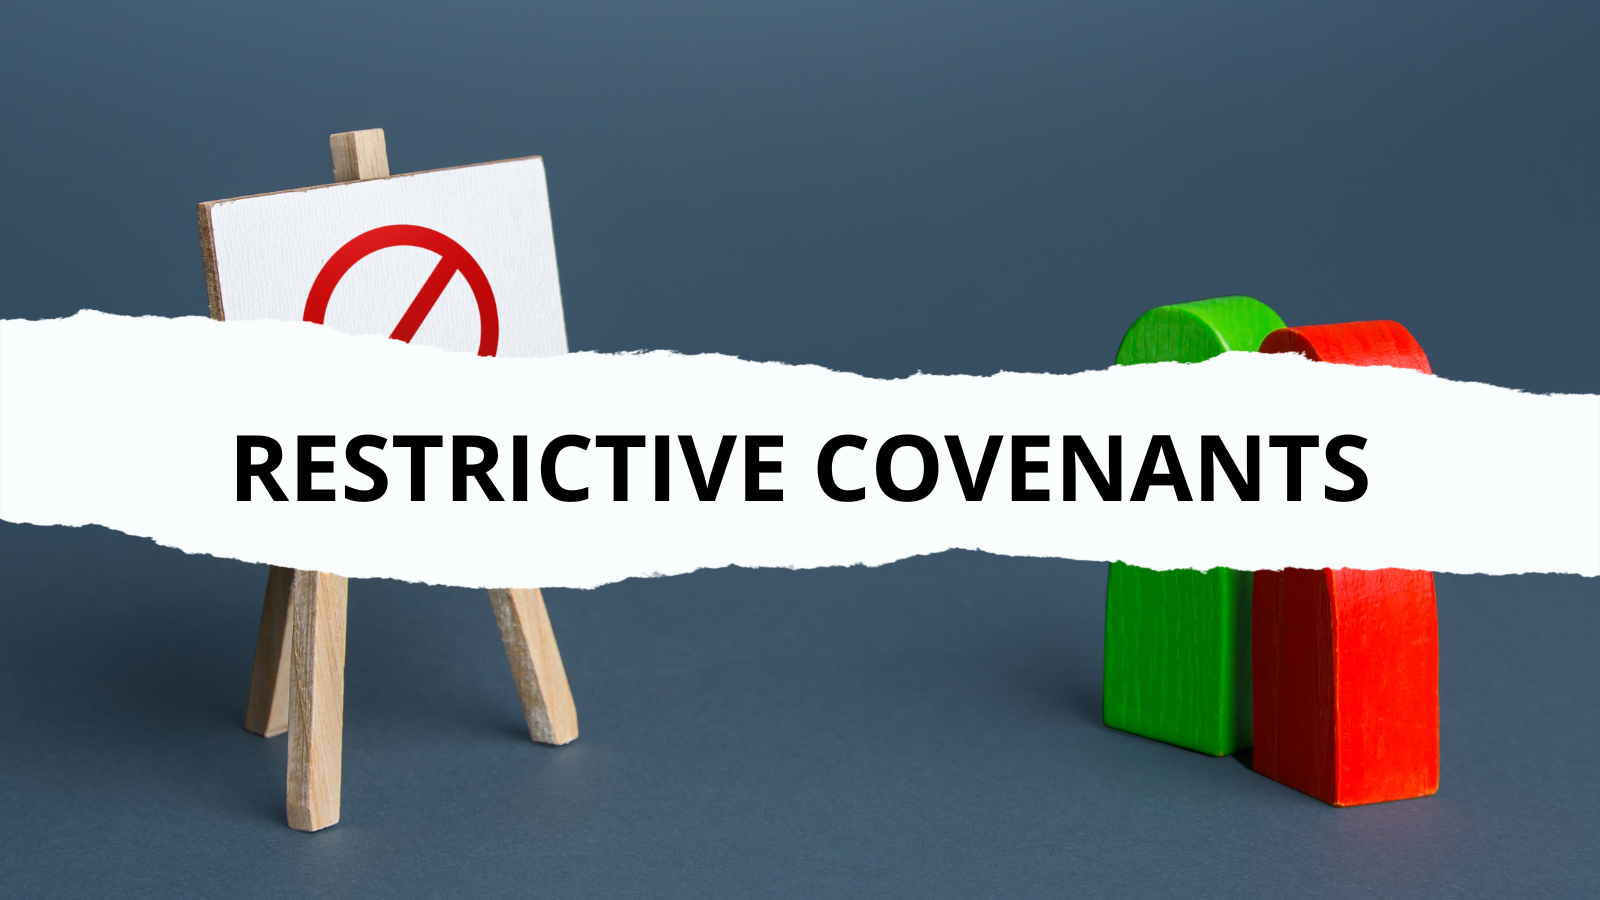 Restrictive Covenants: What Employers need to know